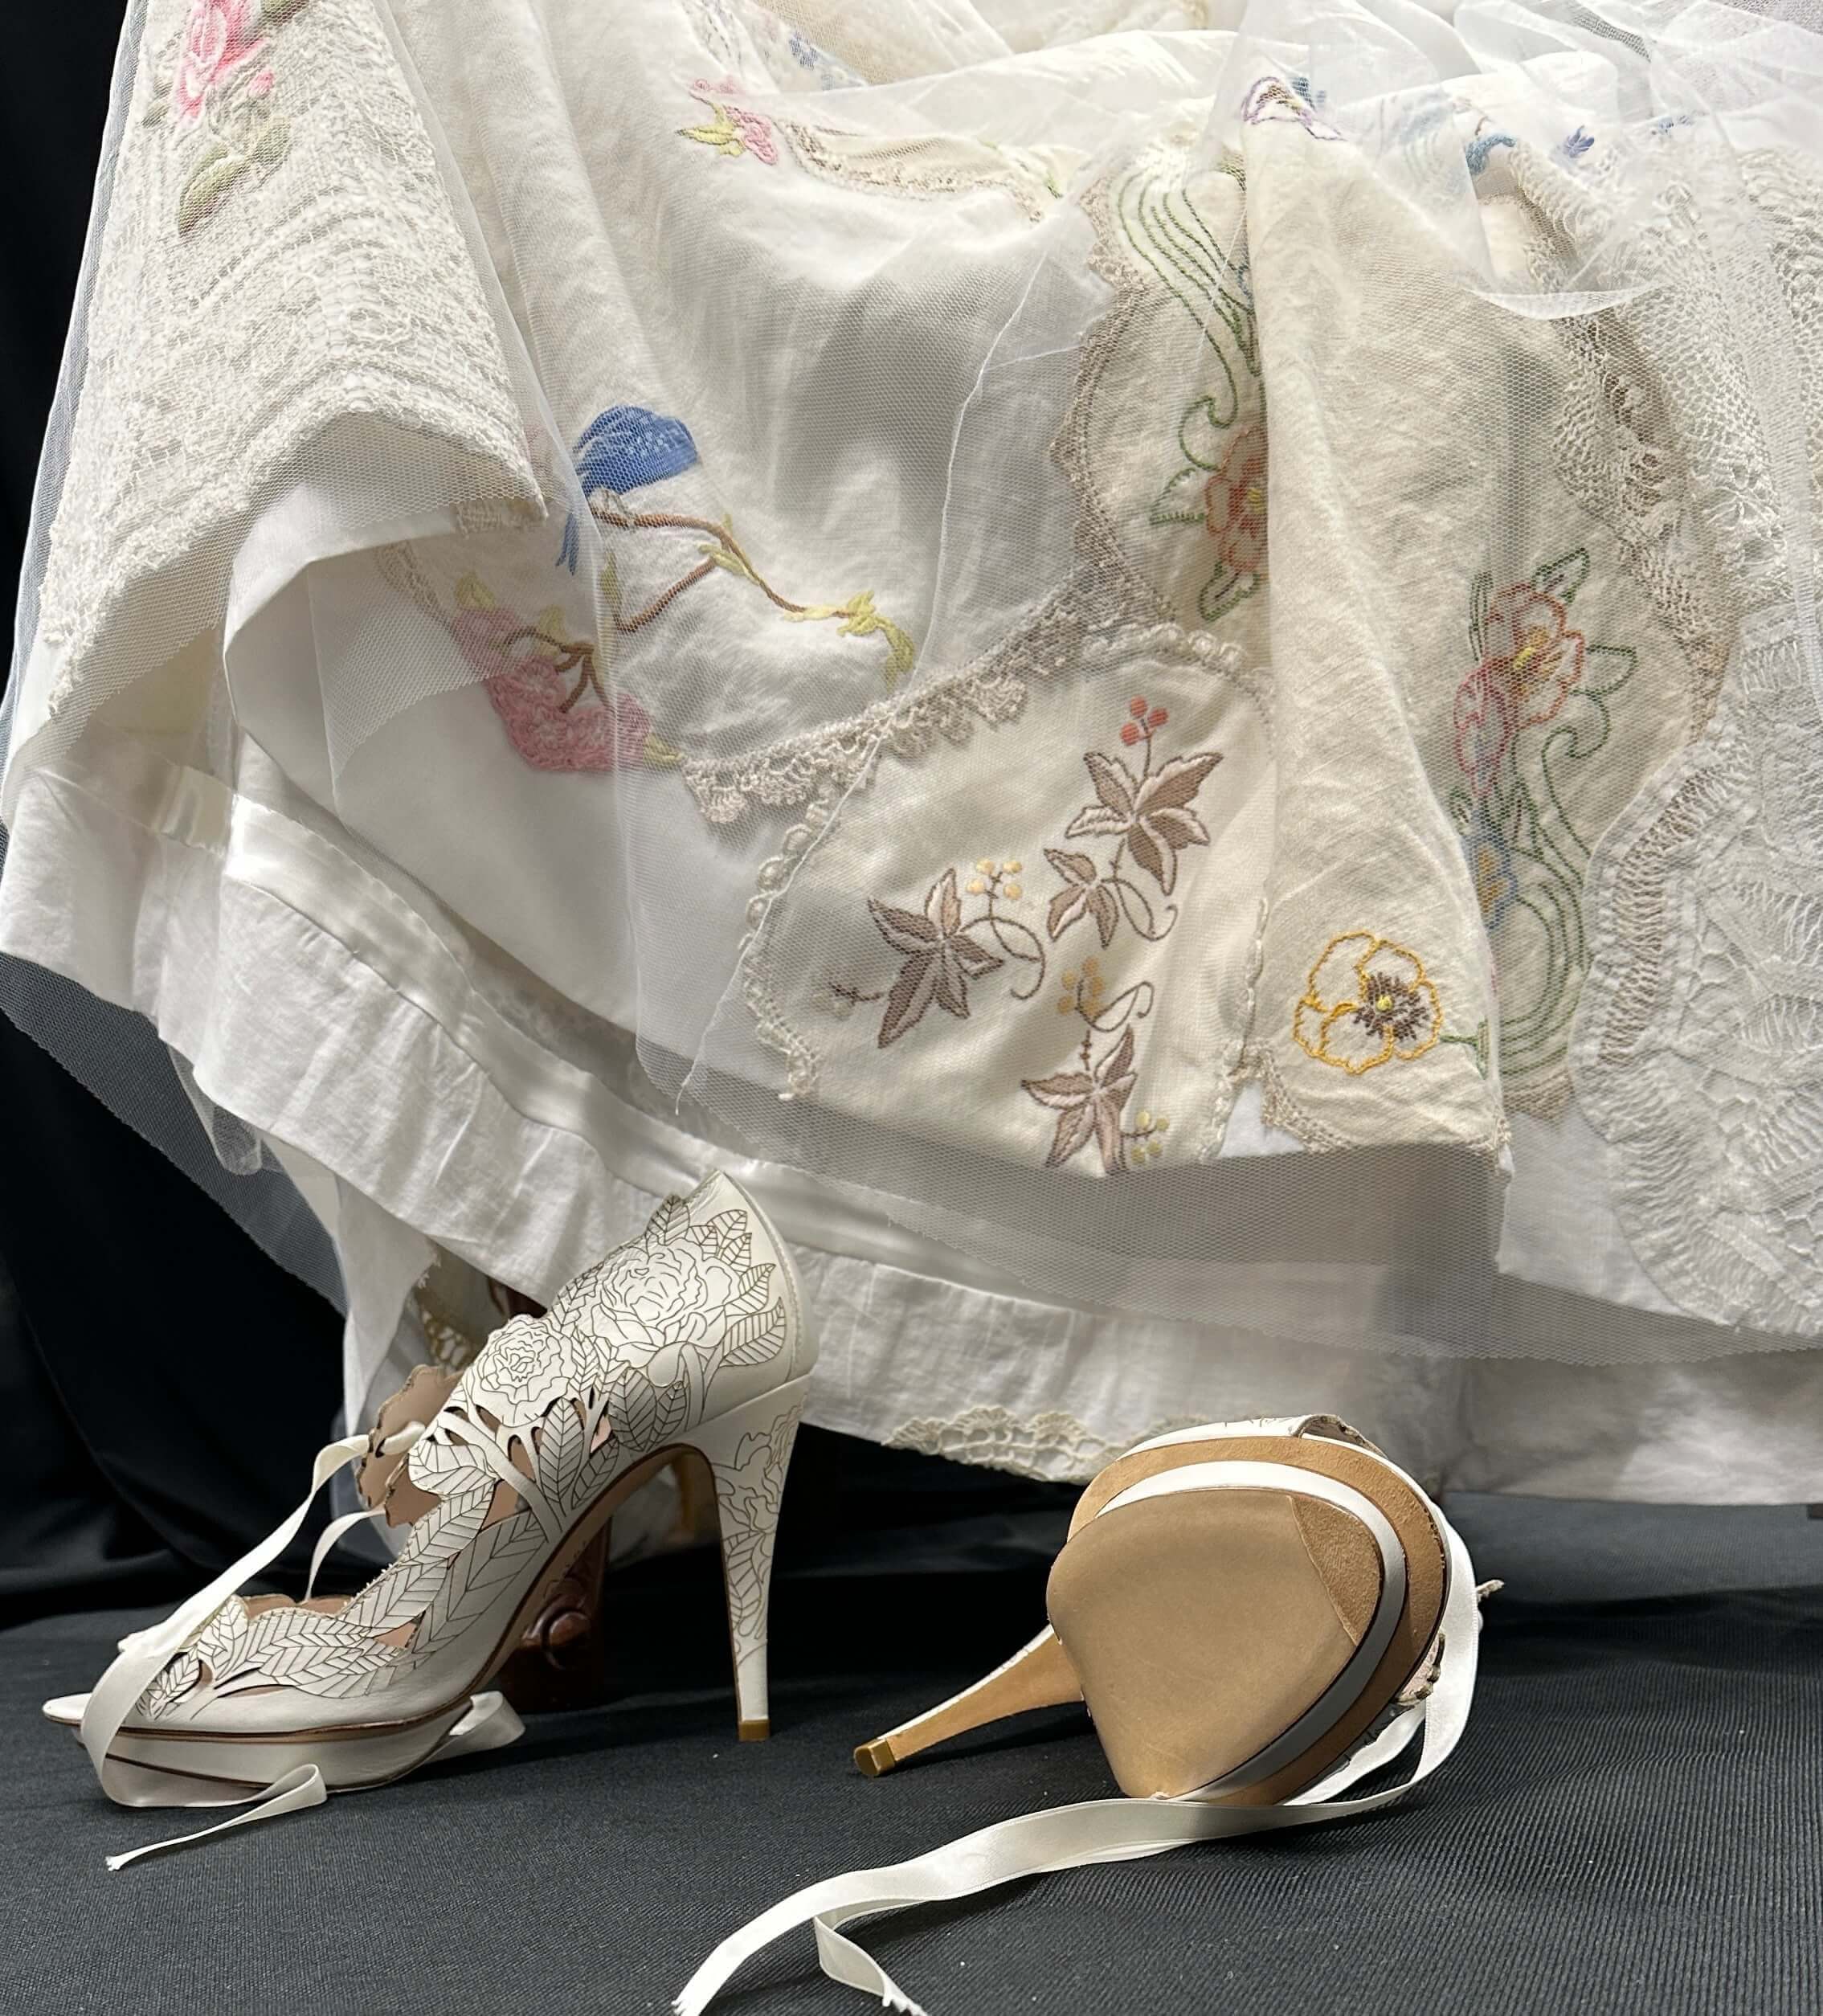 Handmade silk embrodiered wedding dress with two heel shoes in foreground